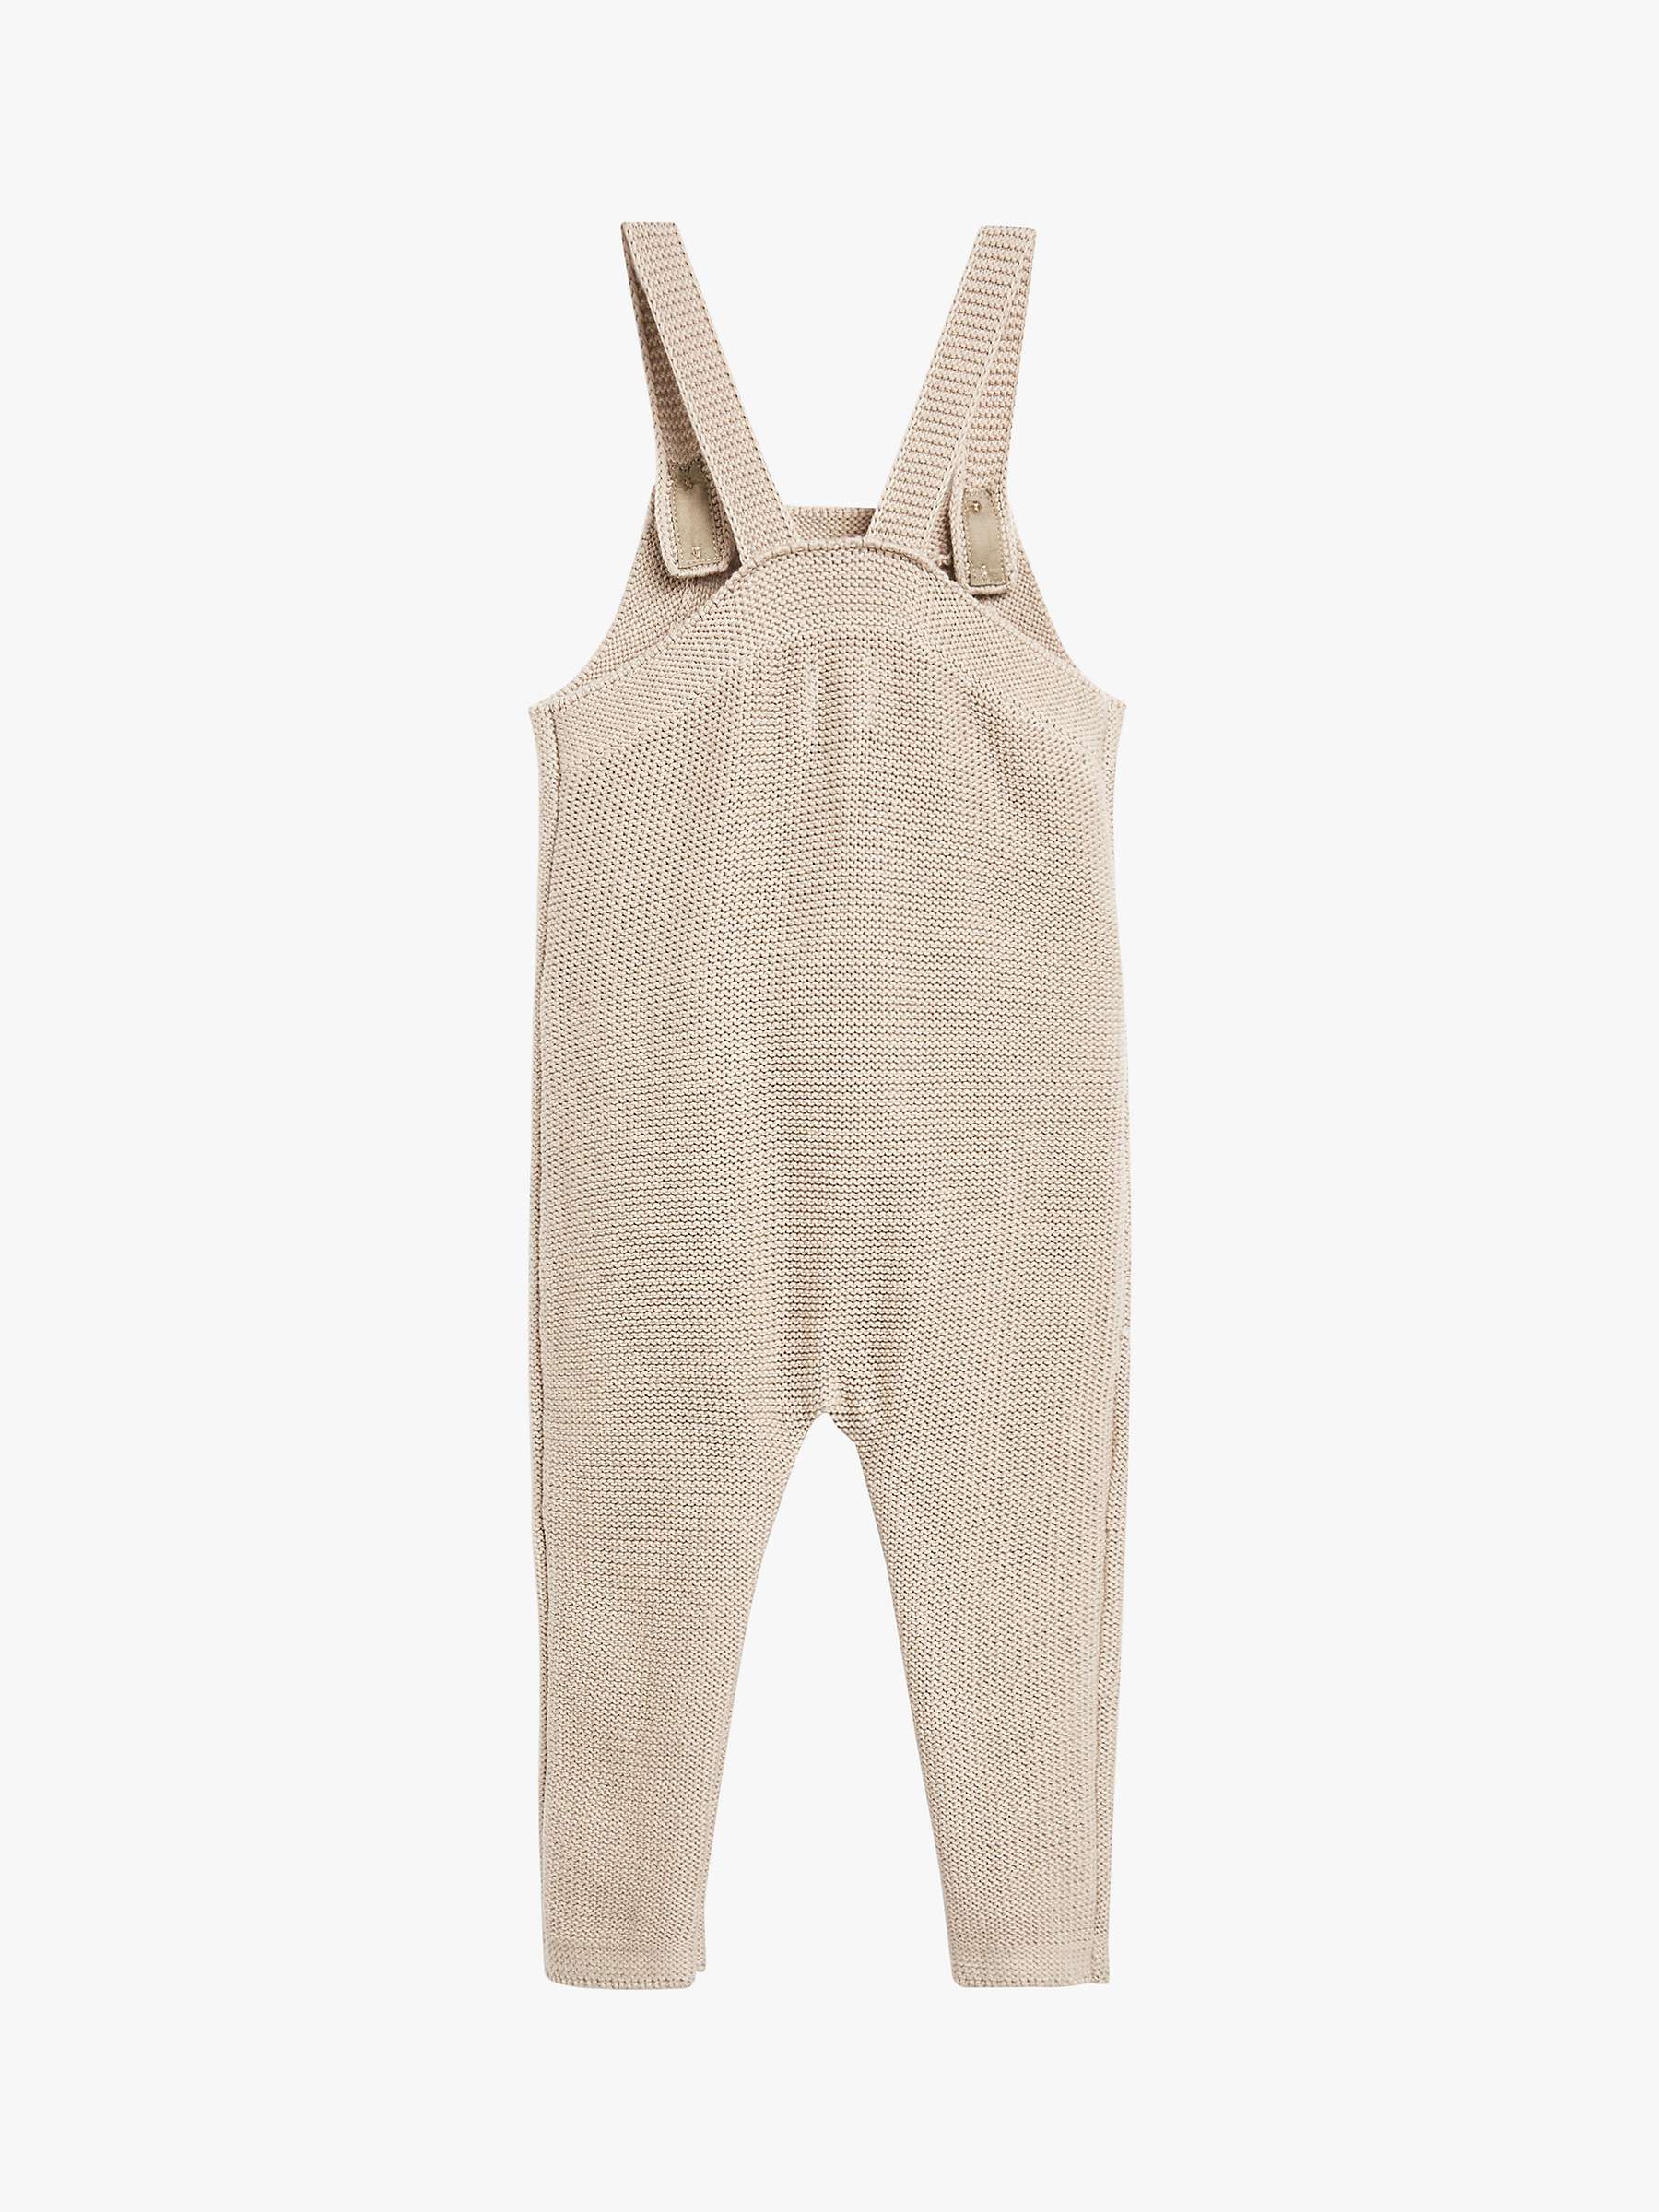 The Little Tailor Baby Knitted Dungarees, Fawn at John Lewis & Partners